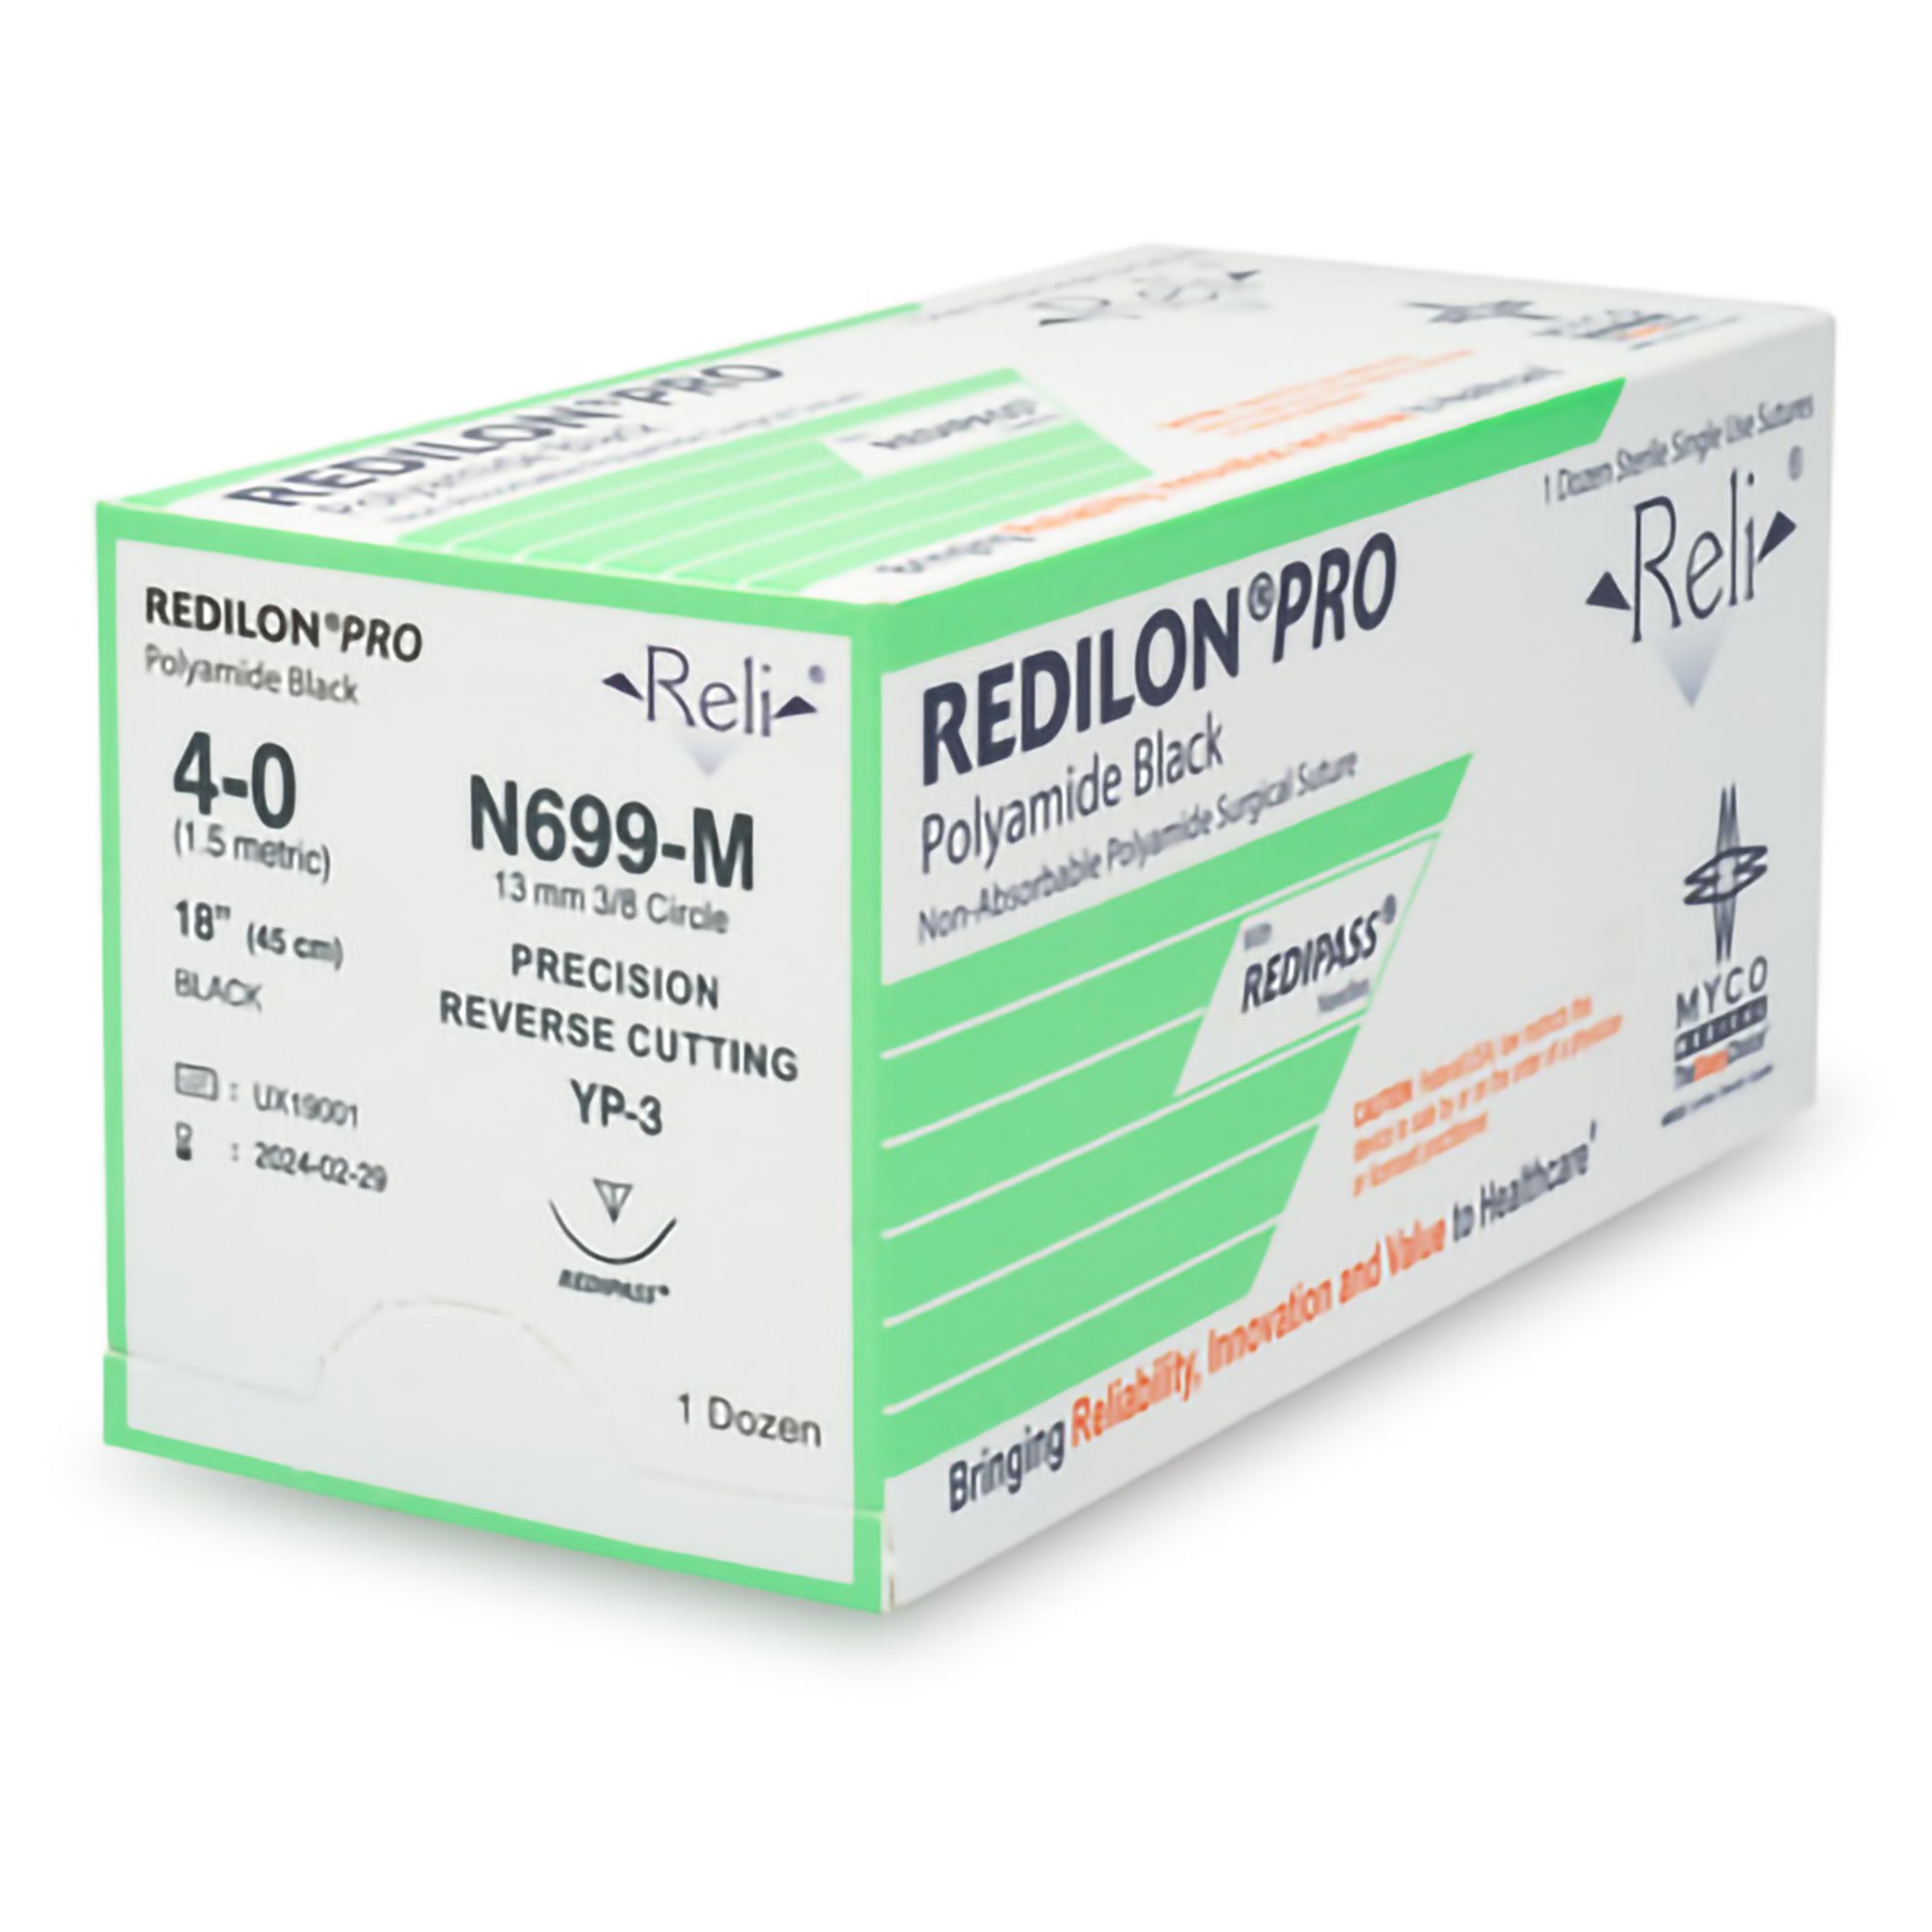 Suture Nonabsorbable Suture with Needle Reli® Re .. .  .  